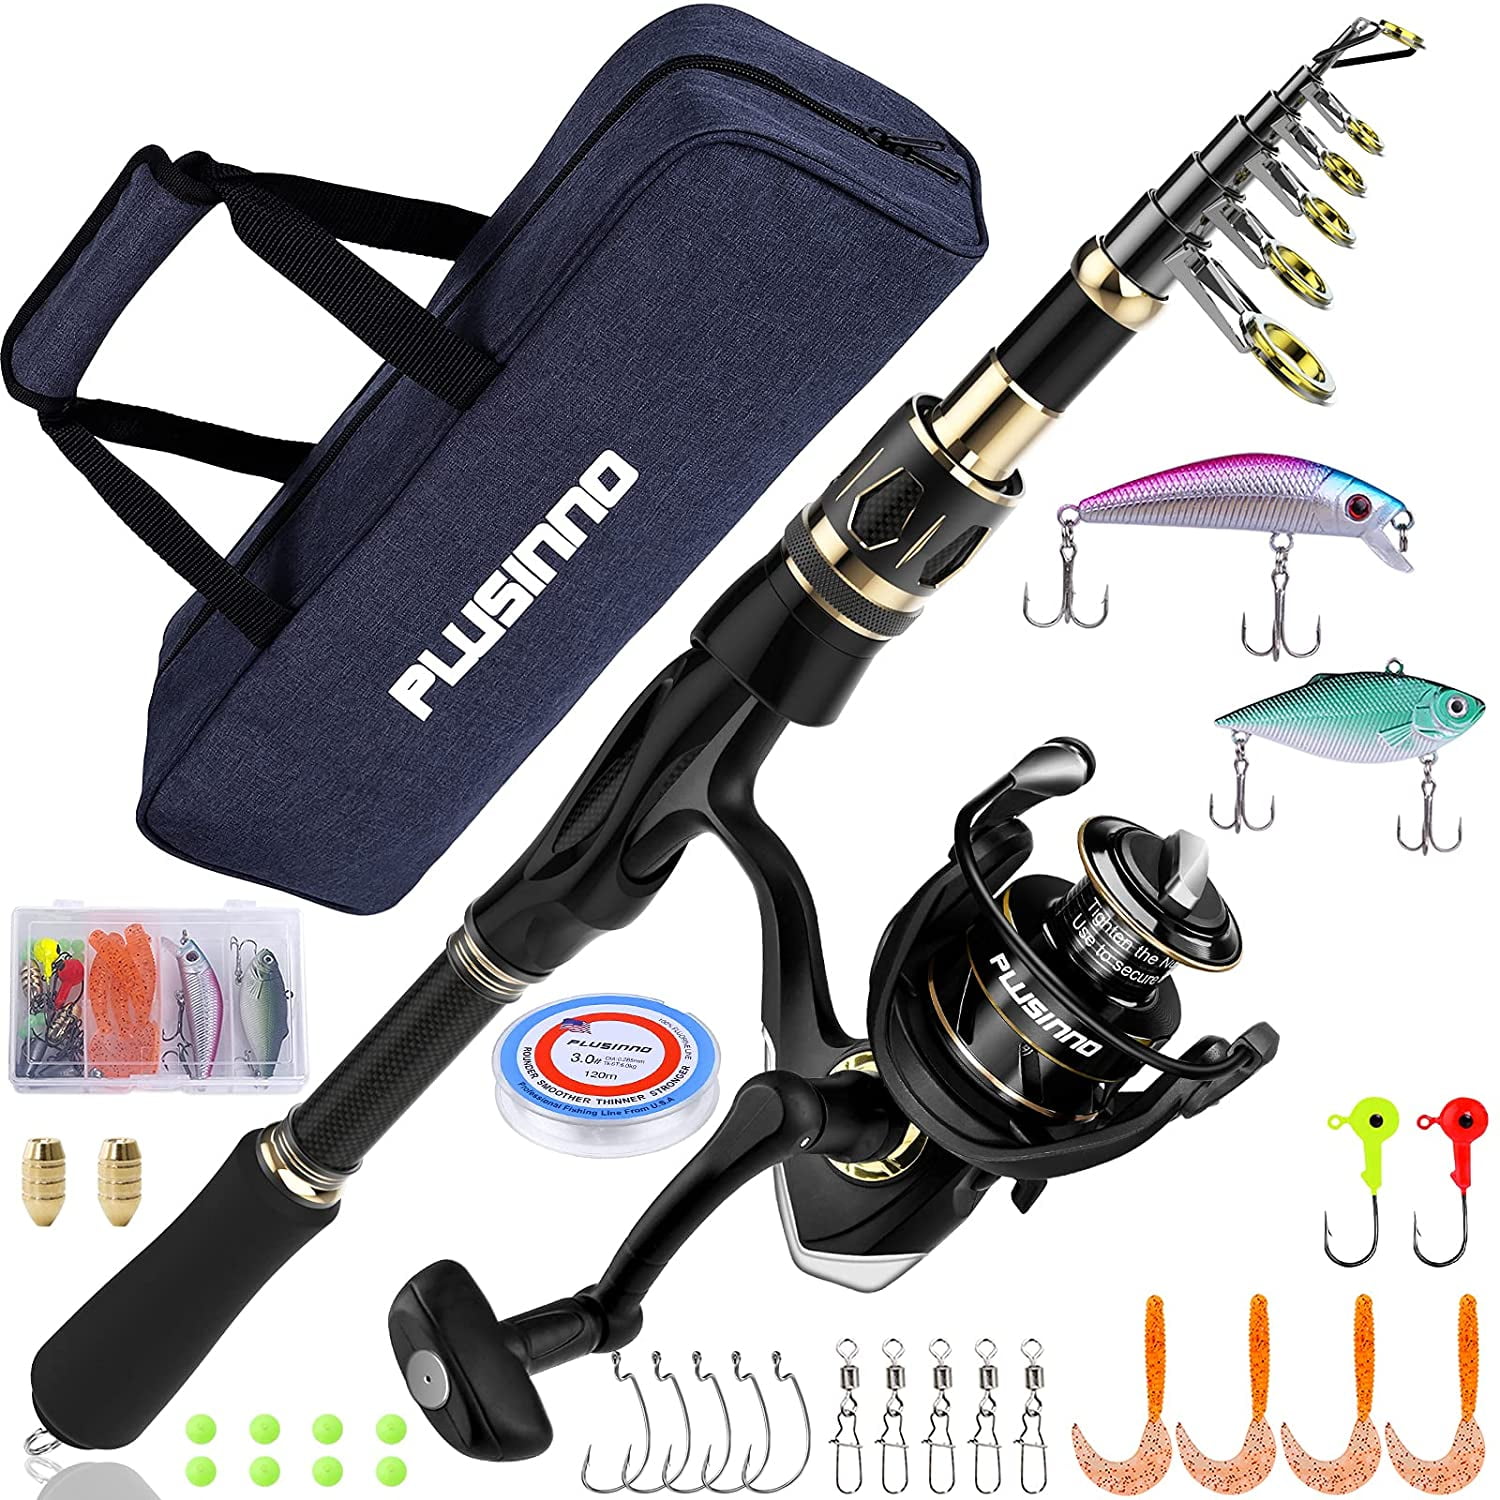 Spinning Telescopic Fishing Rod and Reel Combos Kits Portable Fishing Tackle Set 